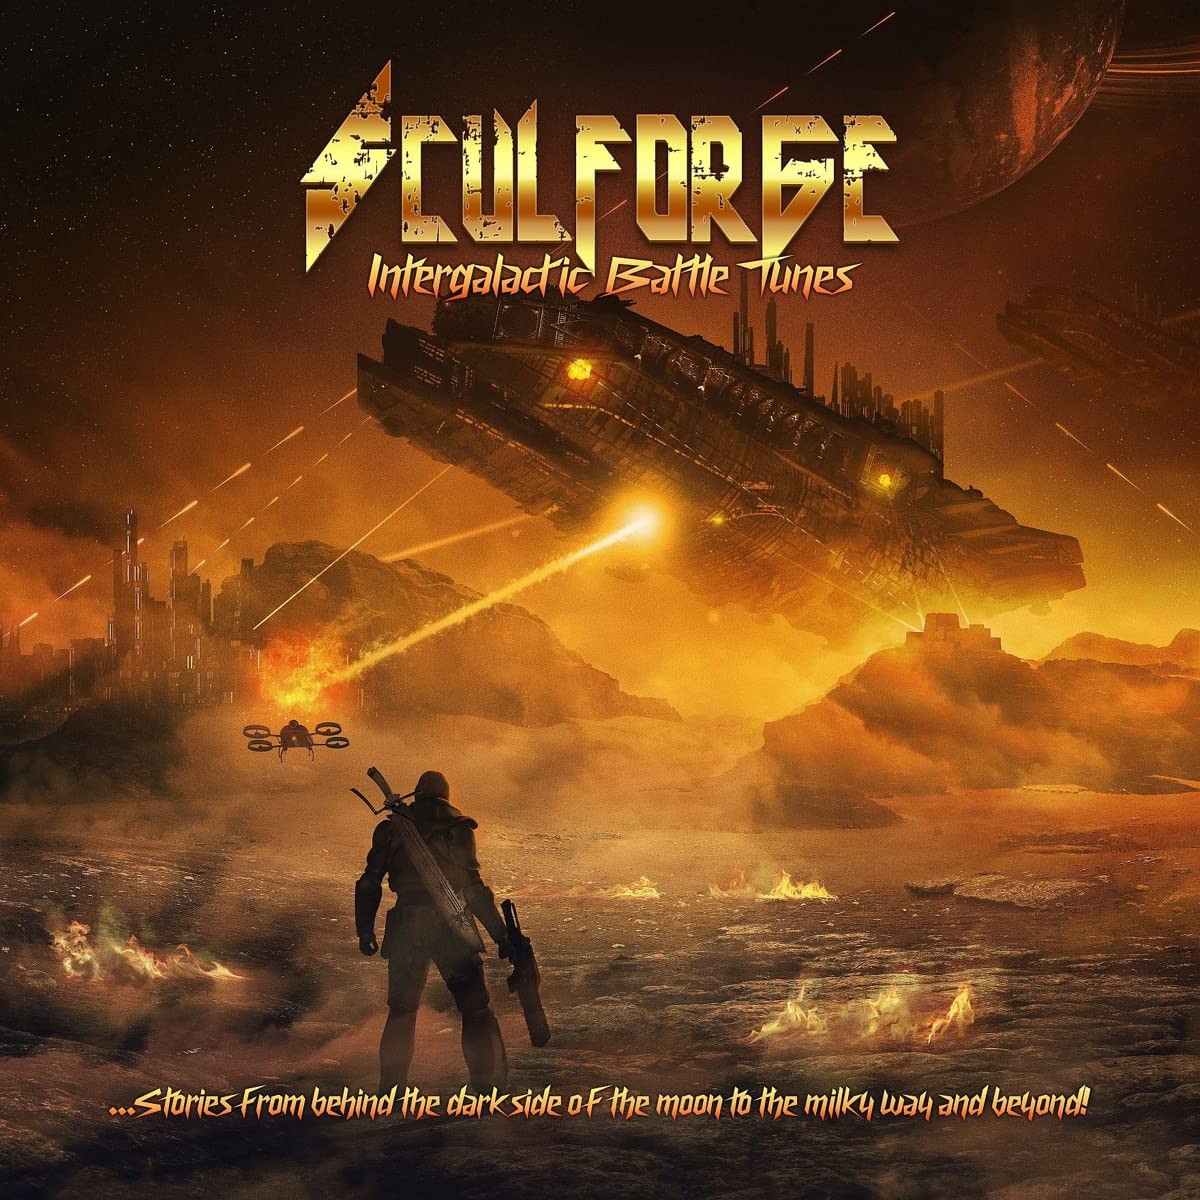 Sculforge (Power Speed Metal)